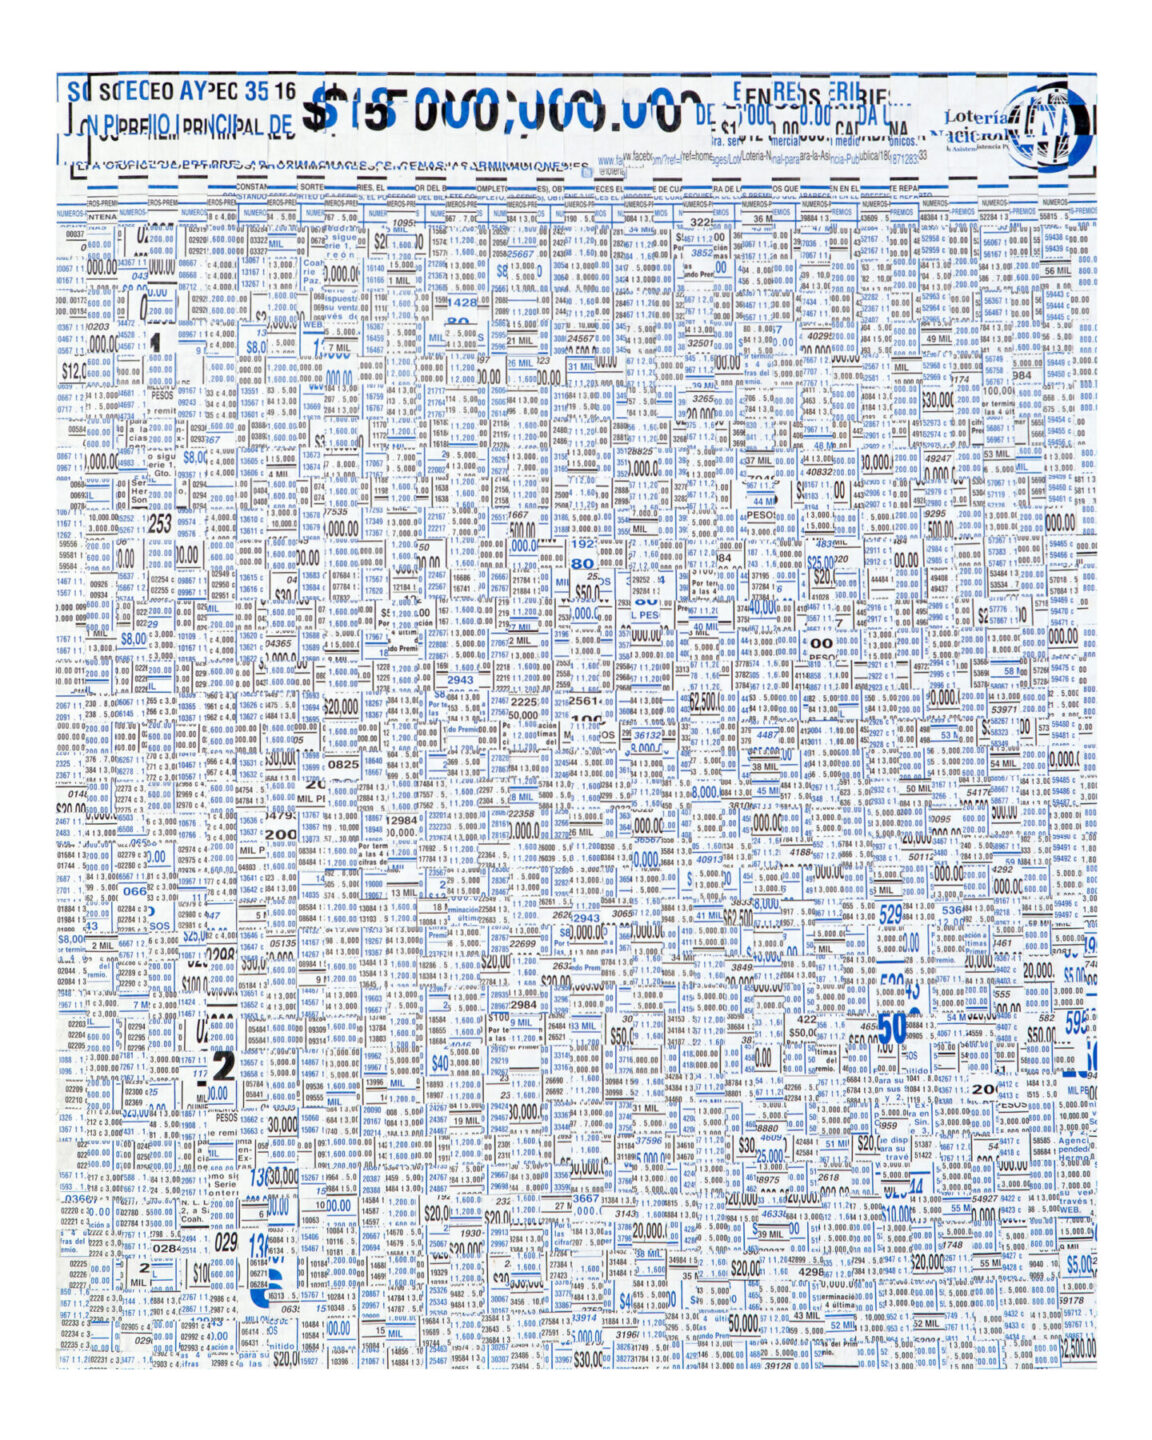 A rectangular work made up of blue and black pieces of paper interwoven together with currency amounts and words in Spanish.